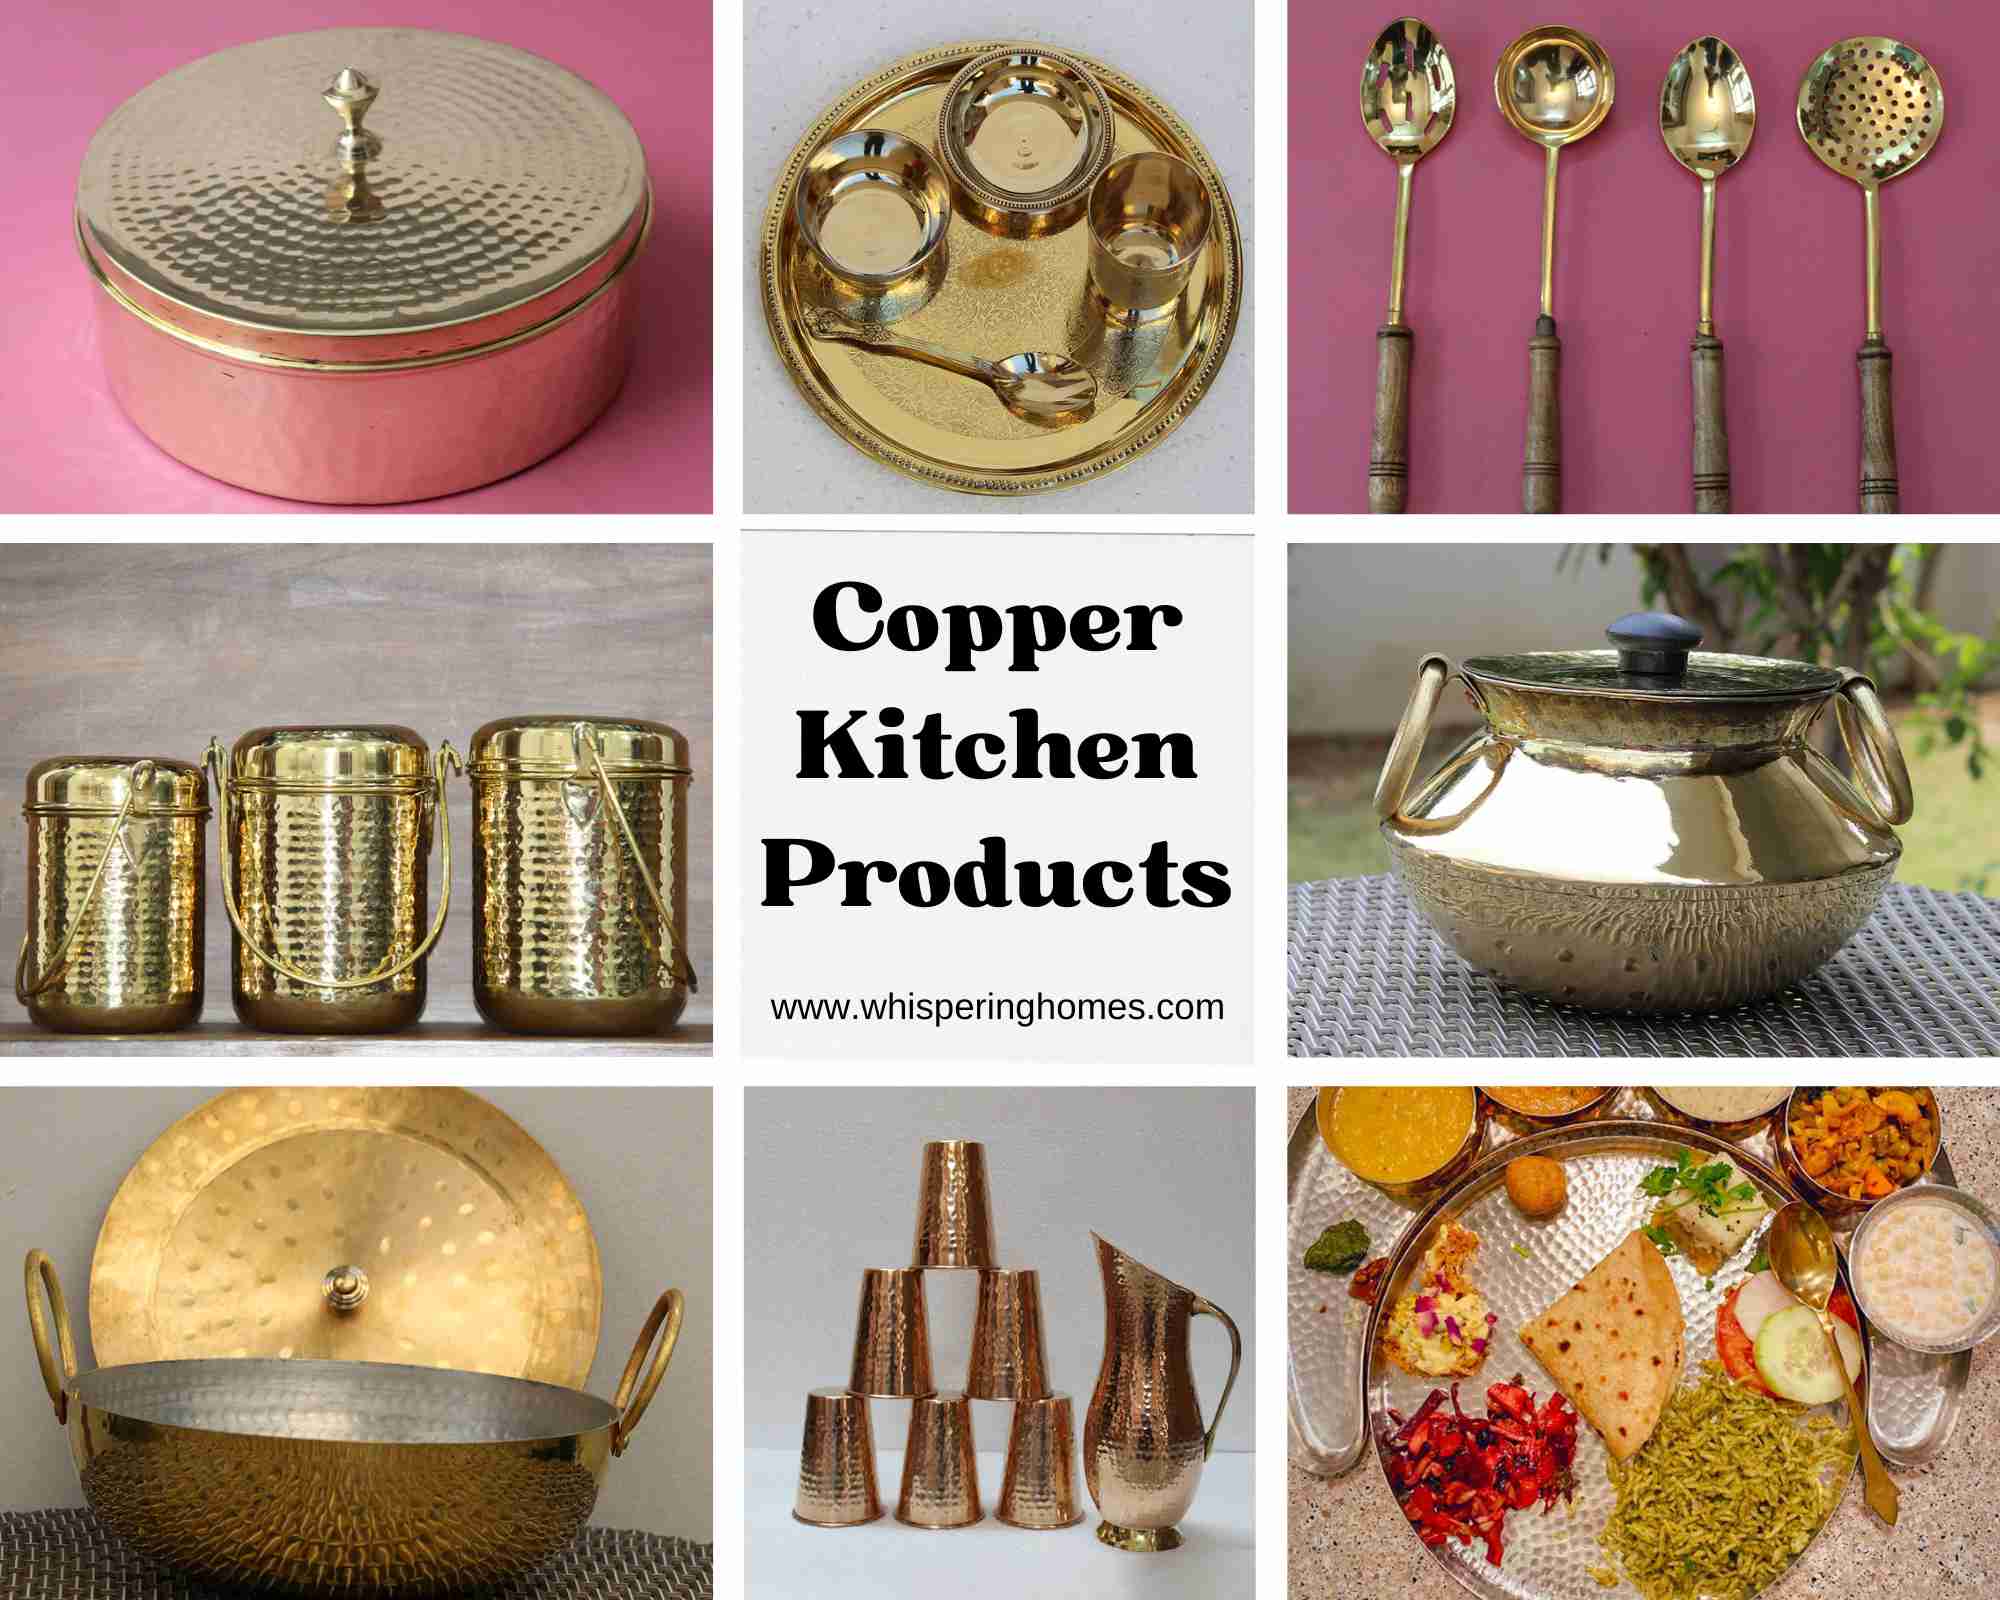 From Kitchen to Wellness : Health Benefits Behind Copper Cookware